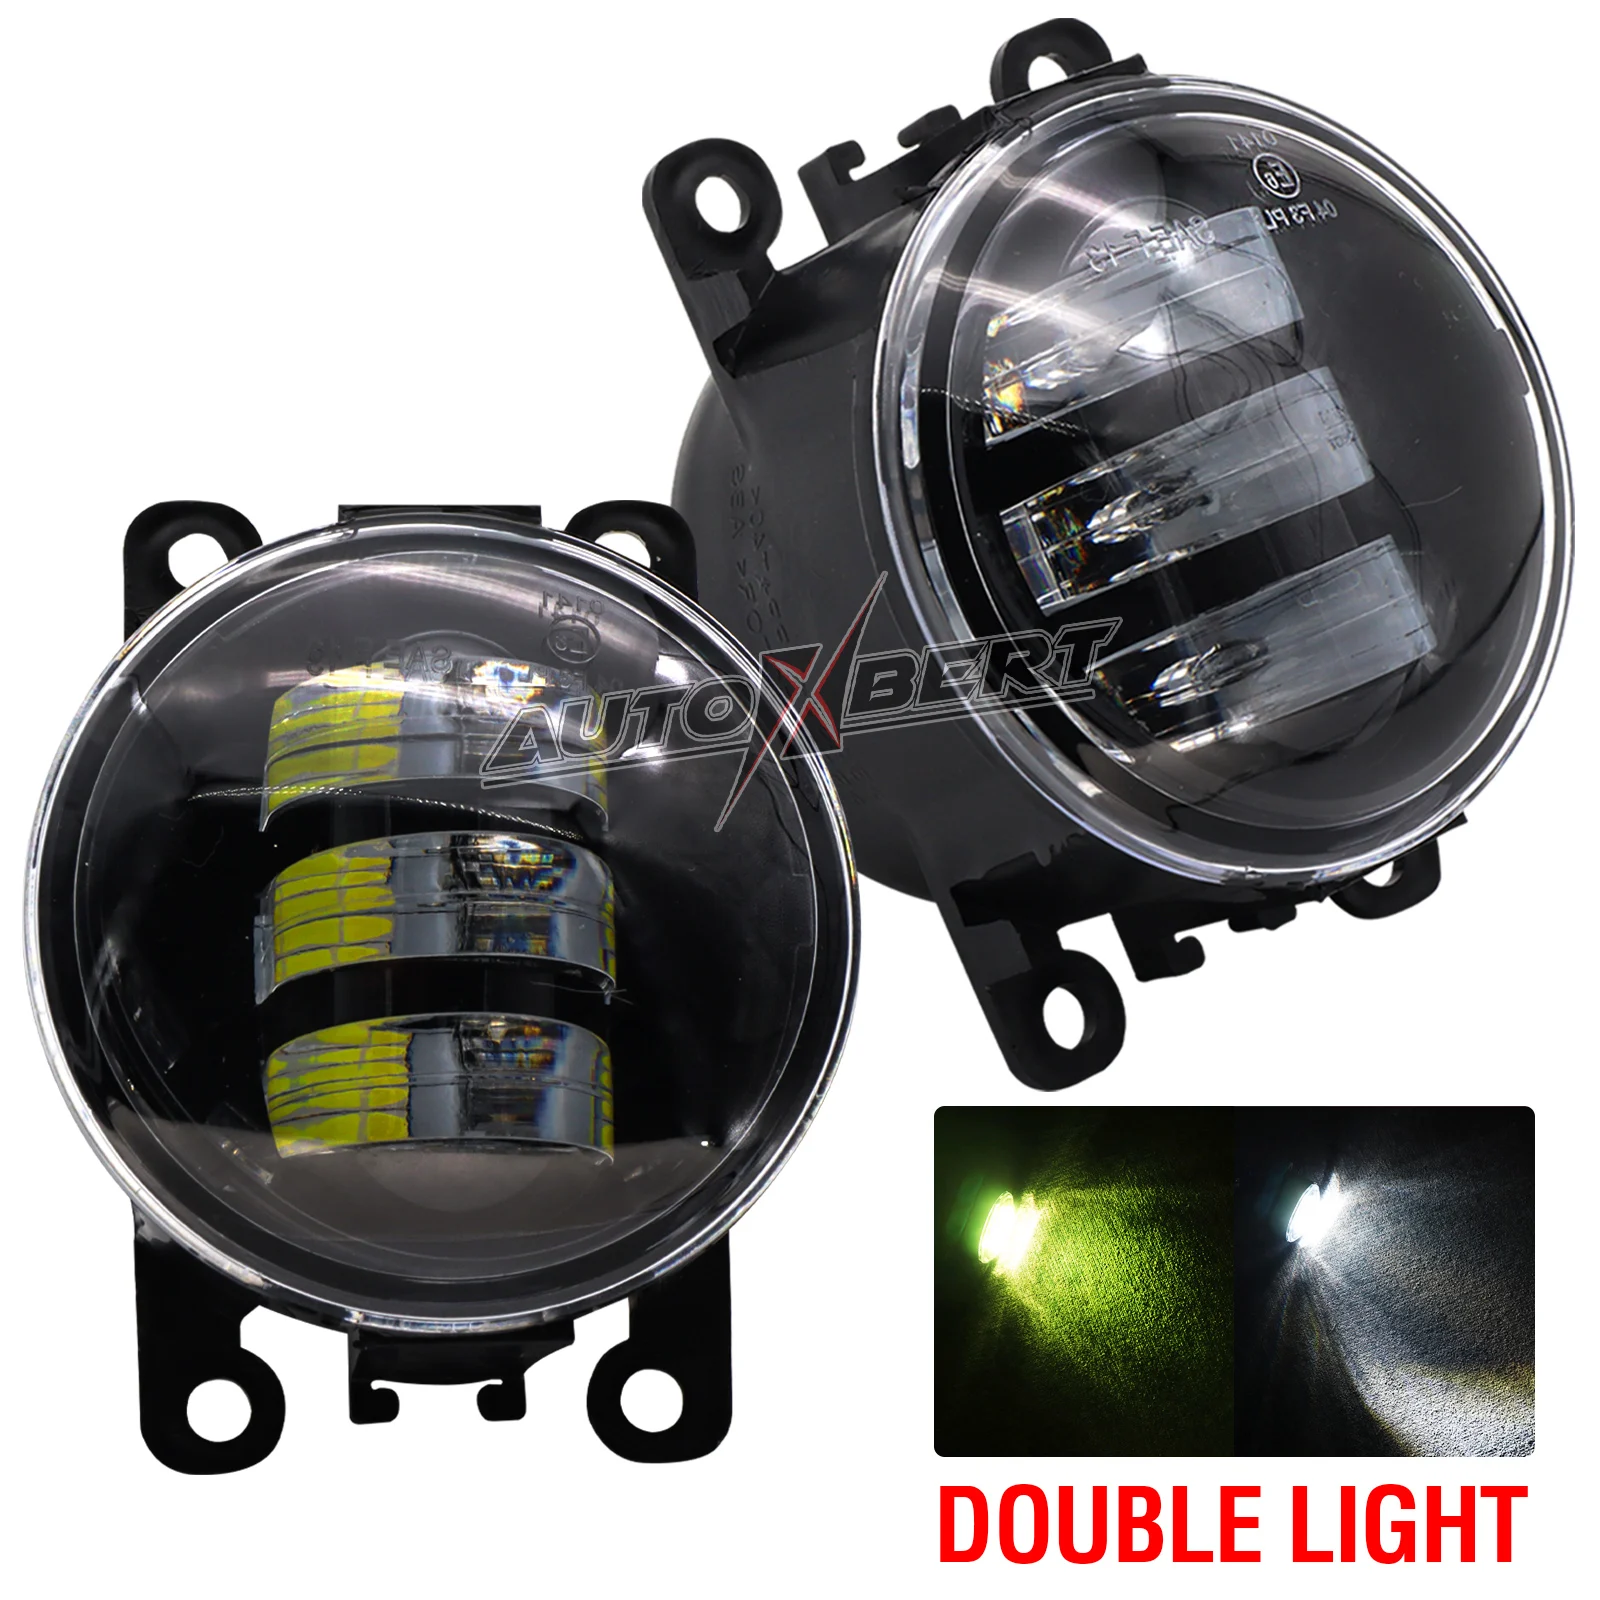 

2x LED Bumper Fog Light Double Lamp Assembly Daytime Running DRL For Renault Clio Duster Trafic Scenic Megane Twingo Kadja Lodgy